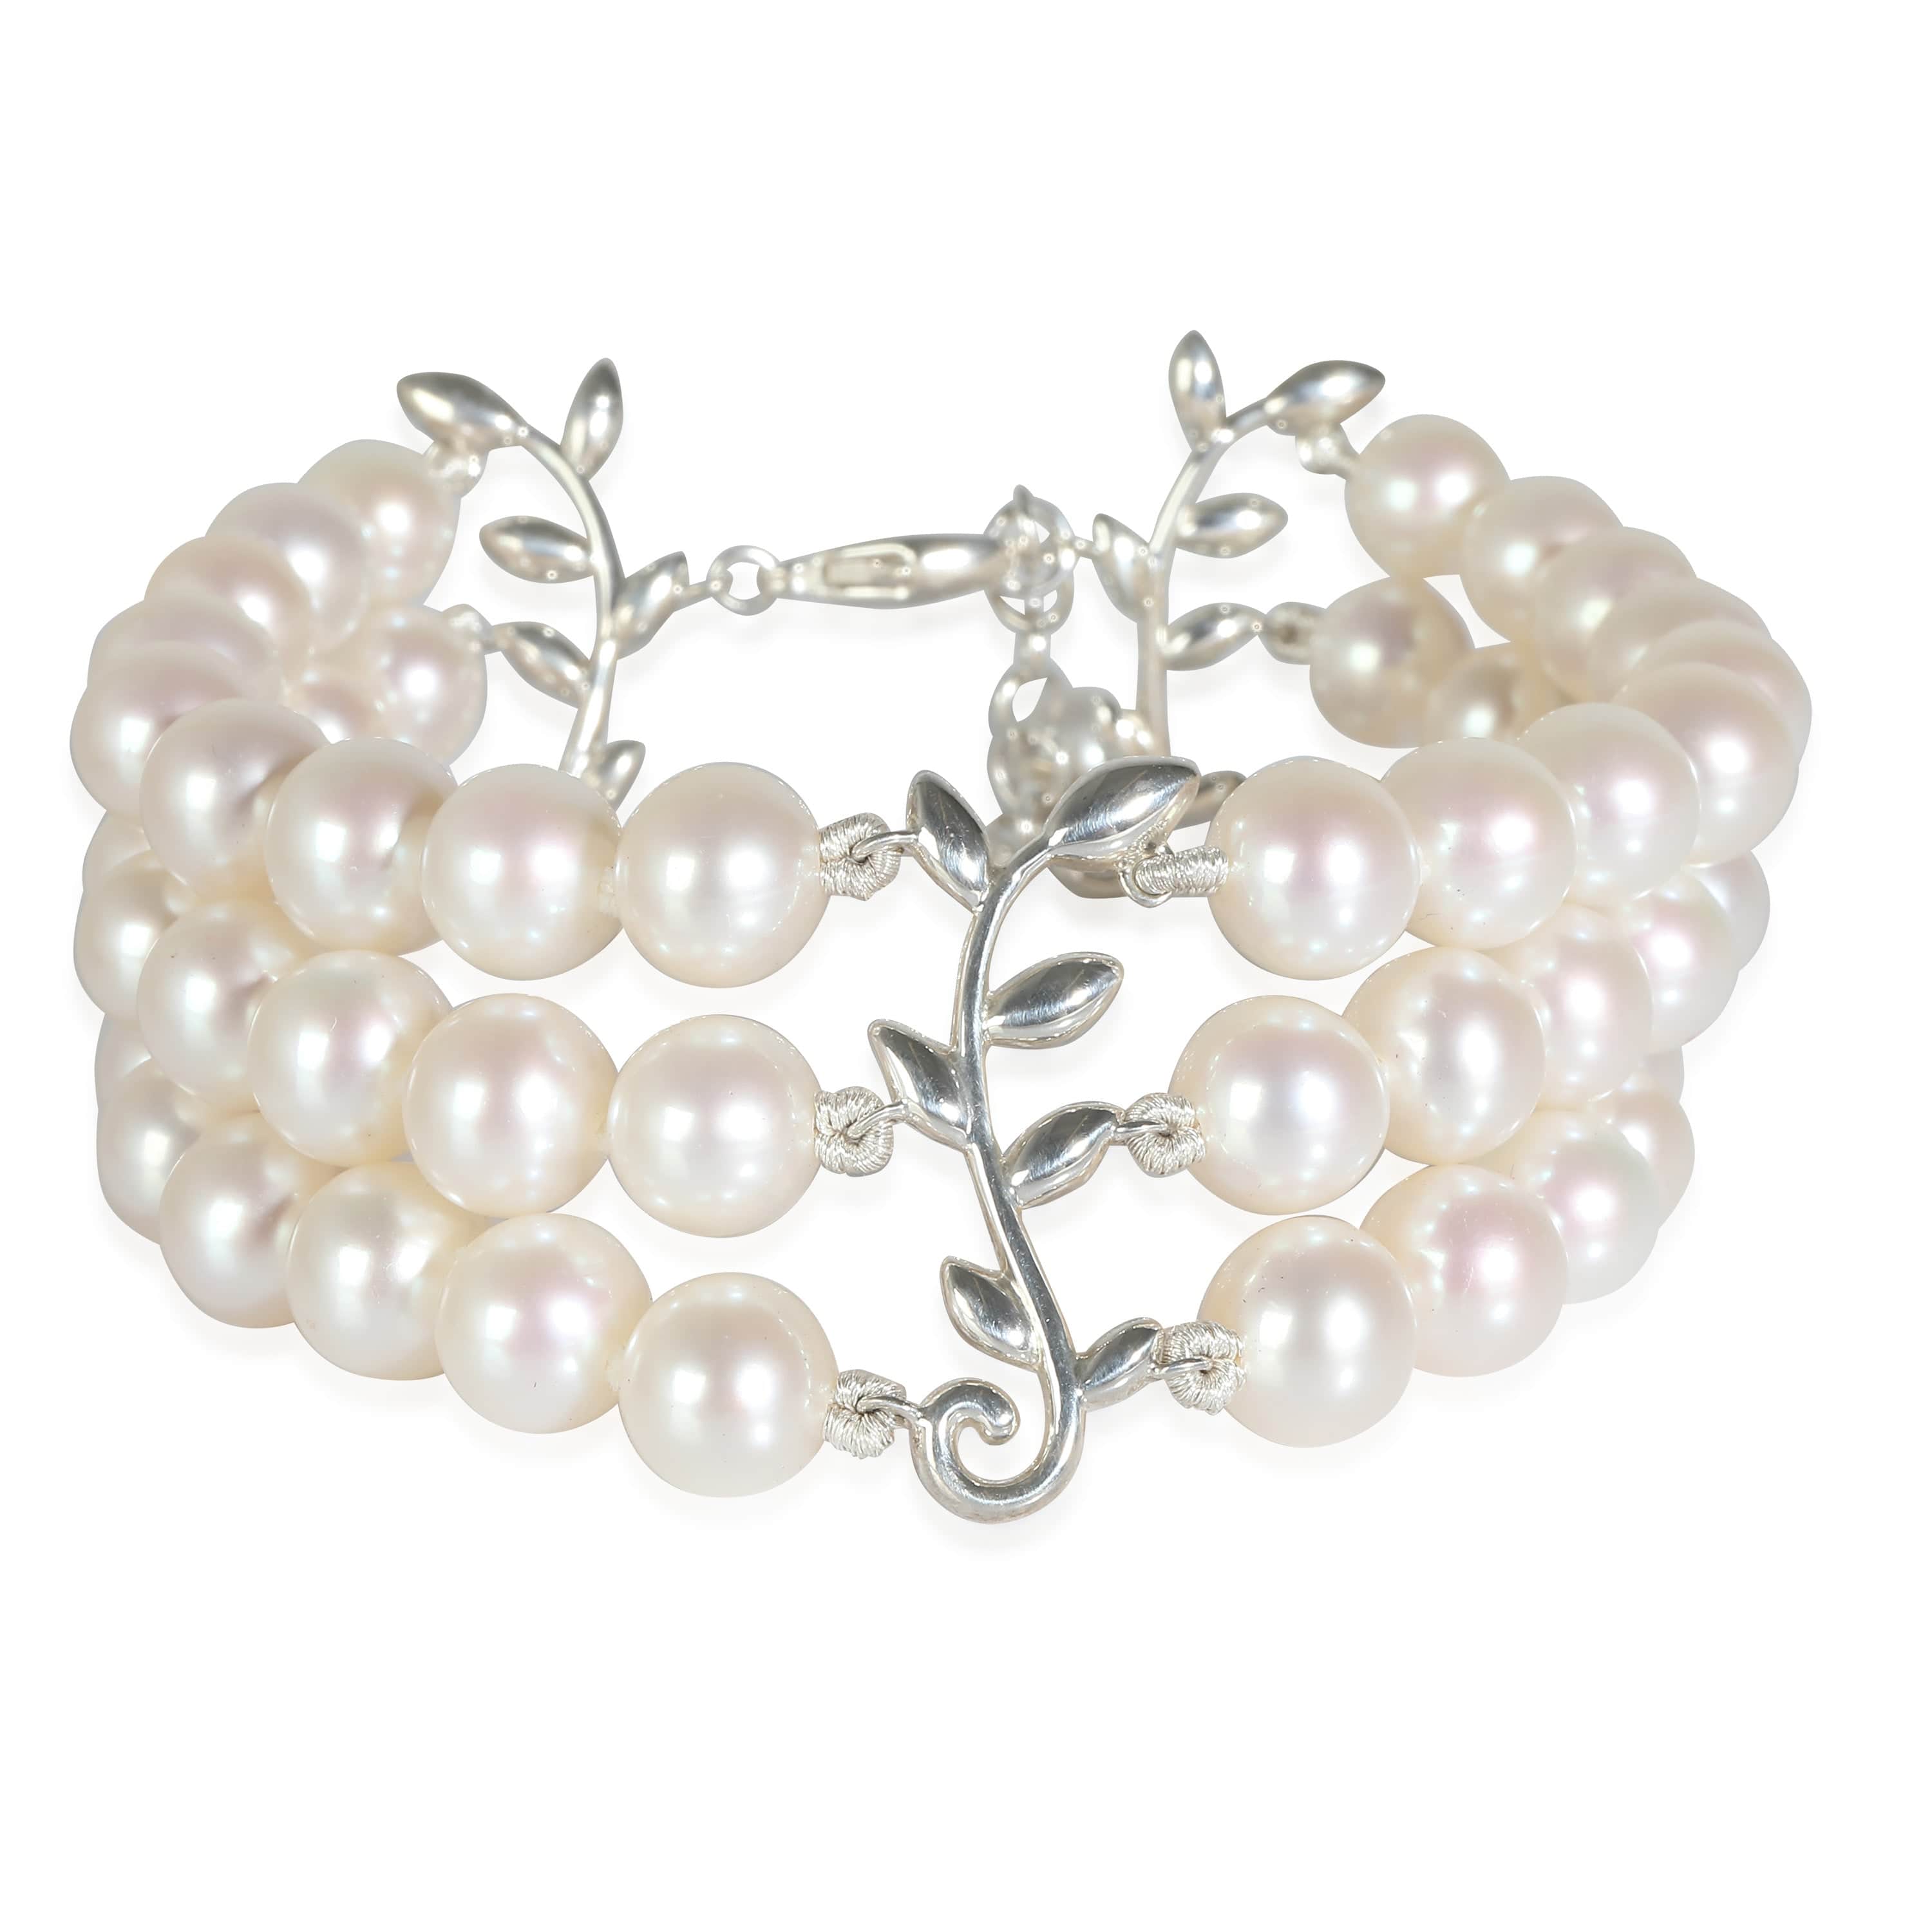 Tiffany & Co. Tiffany & Co. Paloma Picasso Pearl Bracelet in  Sterling Silver